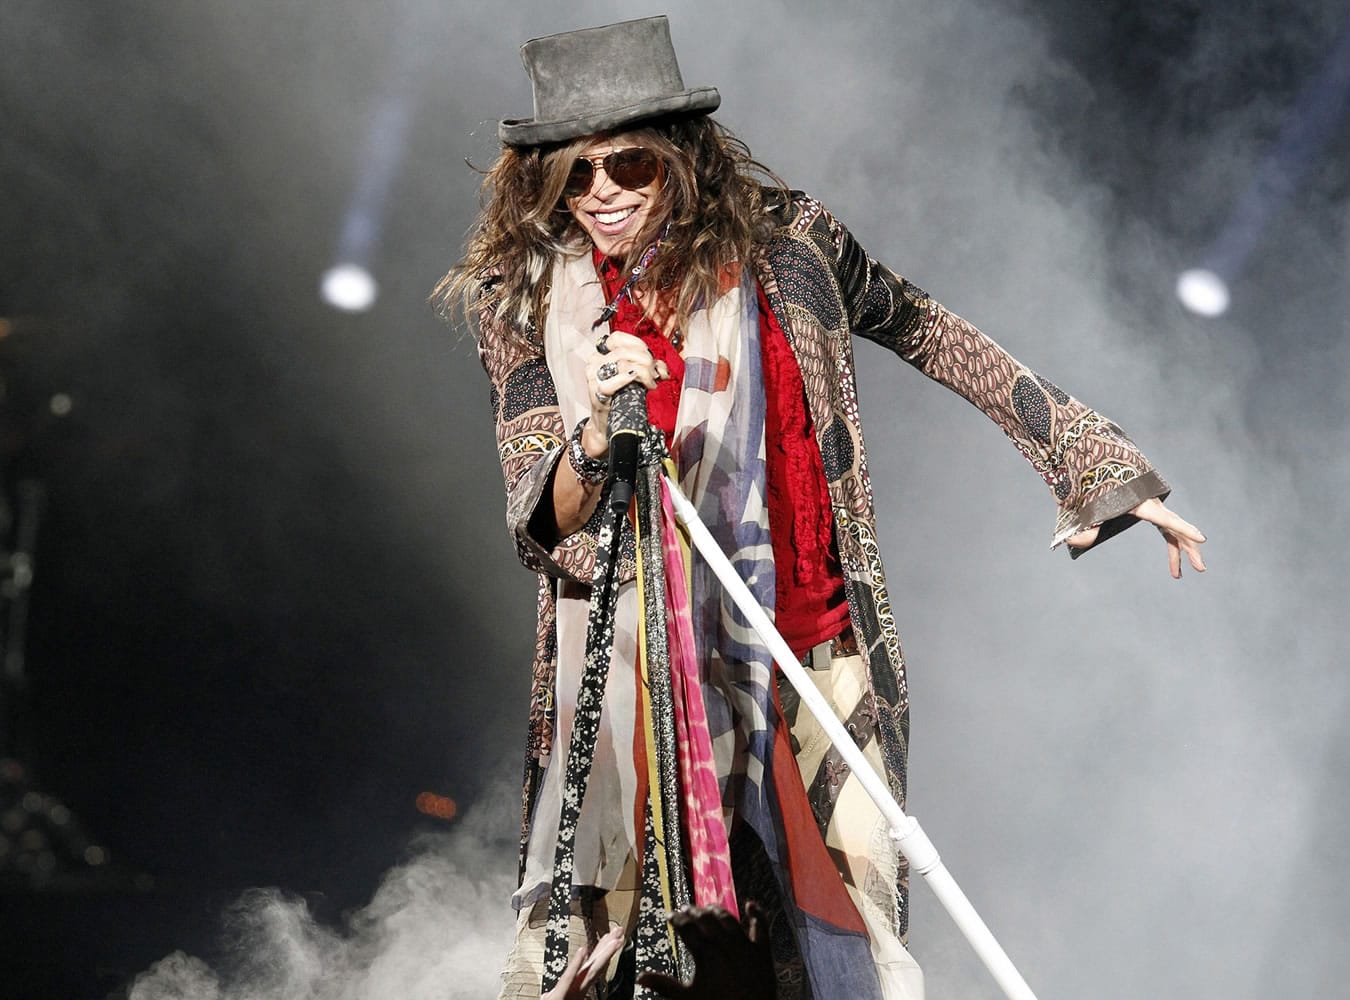 The life of a rock star, such as Steven Tyler of Aerosmith, &quot;is not that much different than a ver intense business traveler,&quot; says Michael Franti.